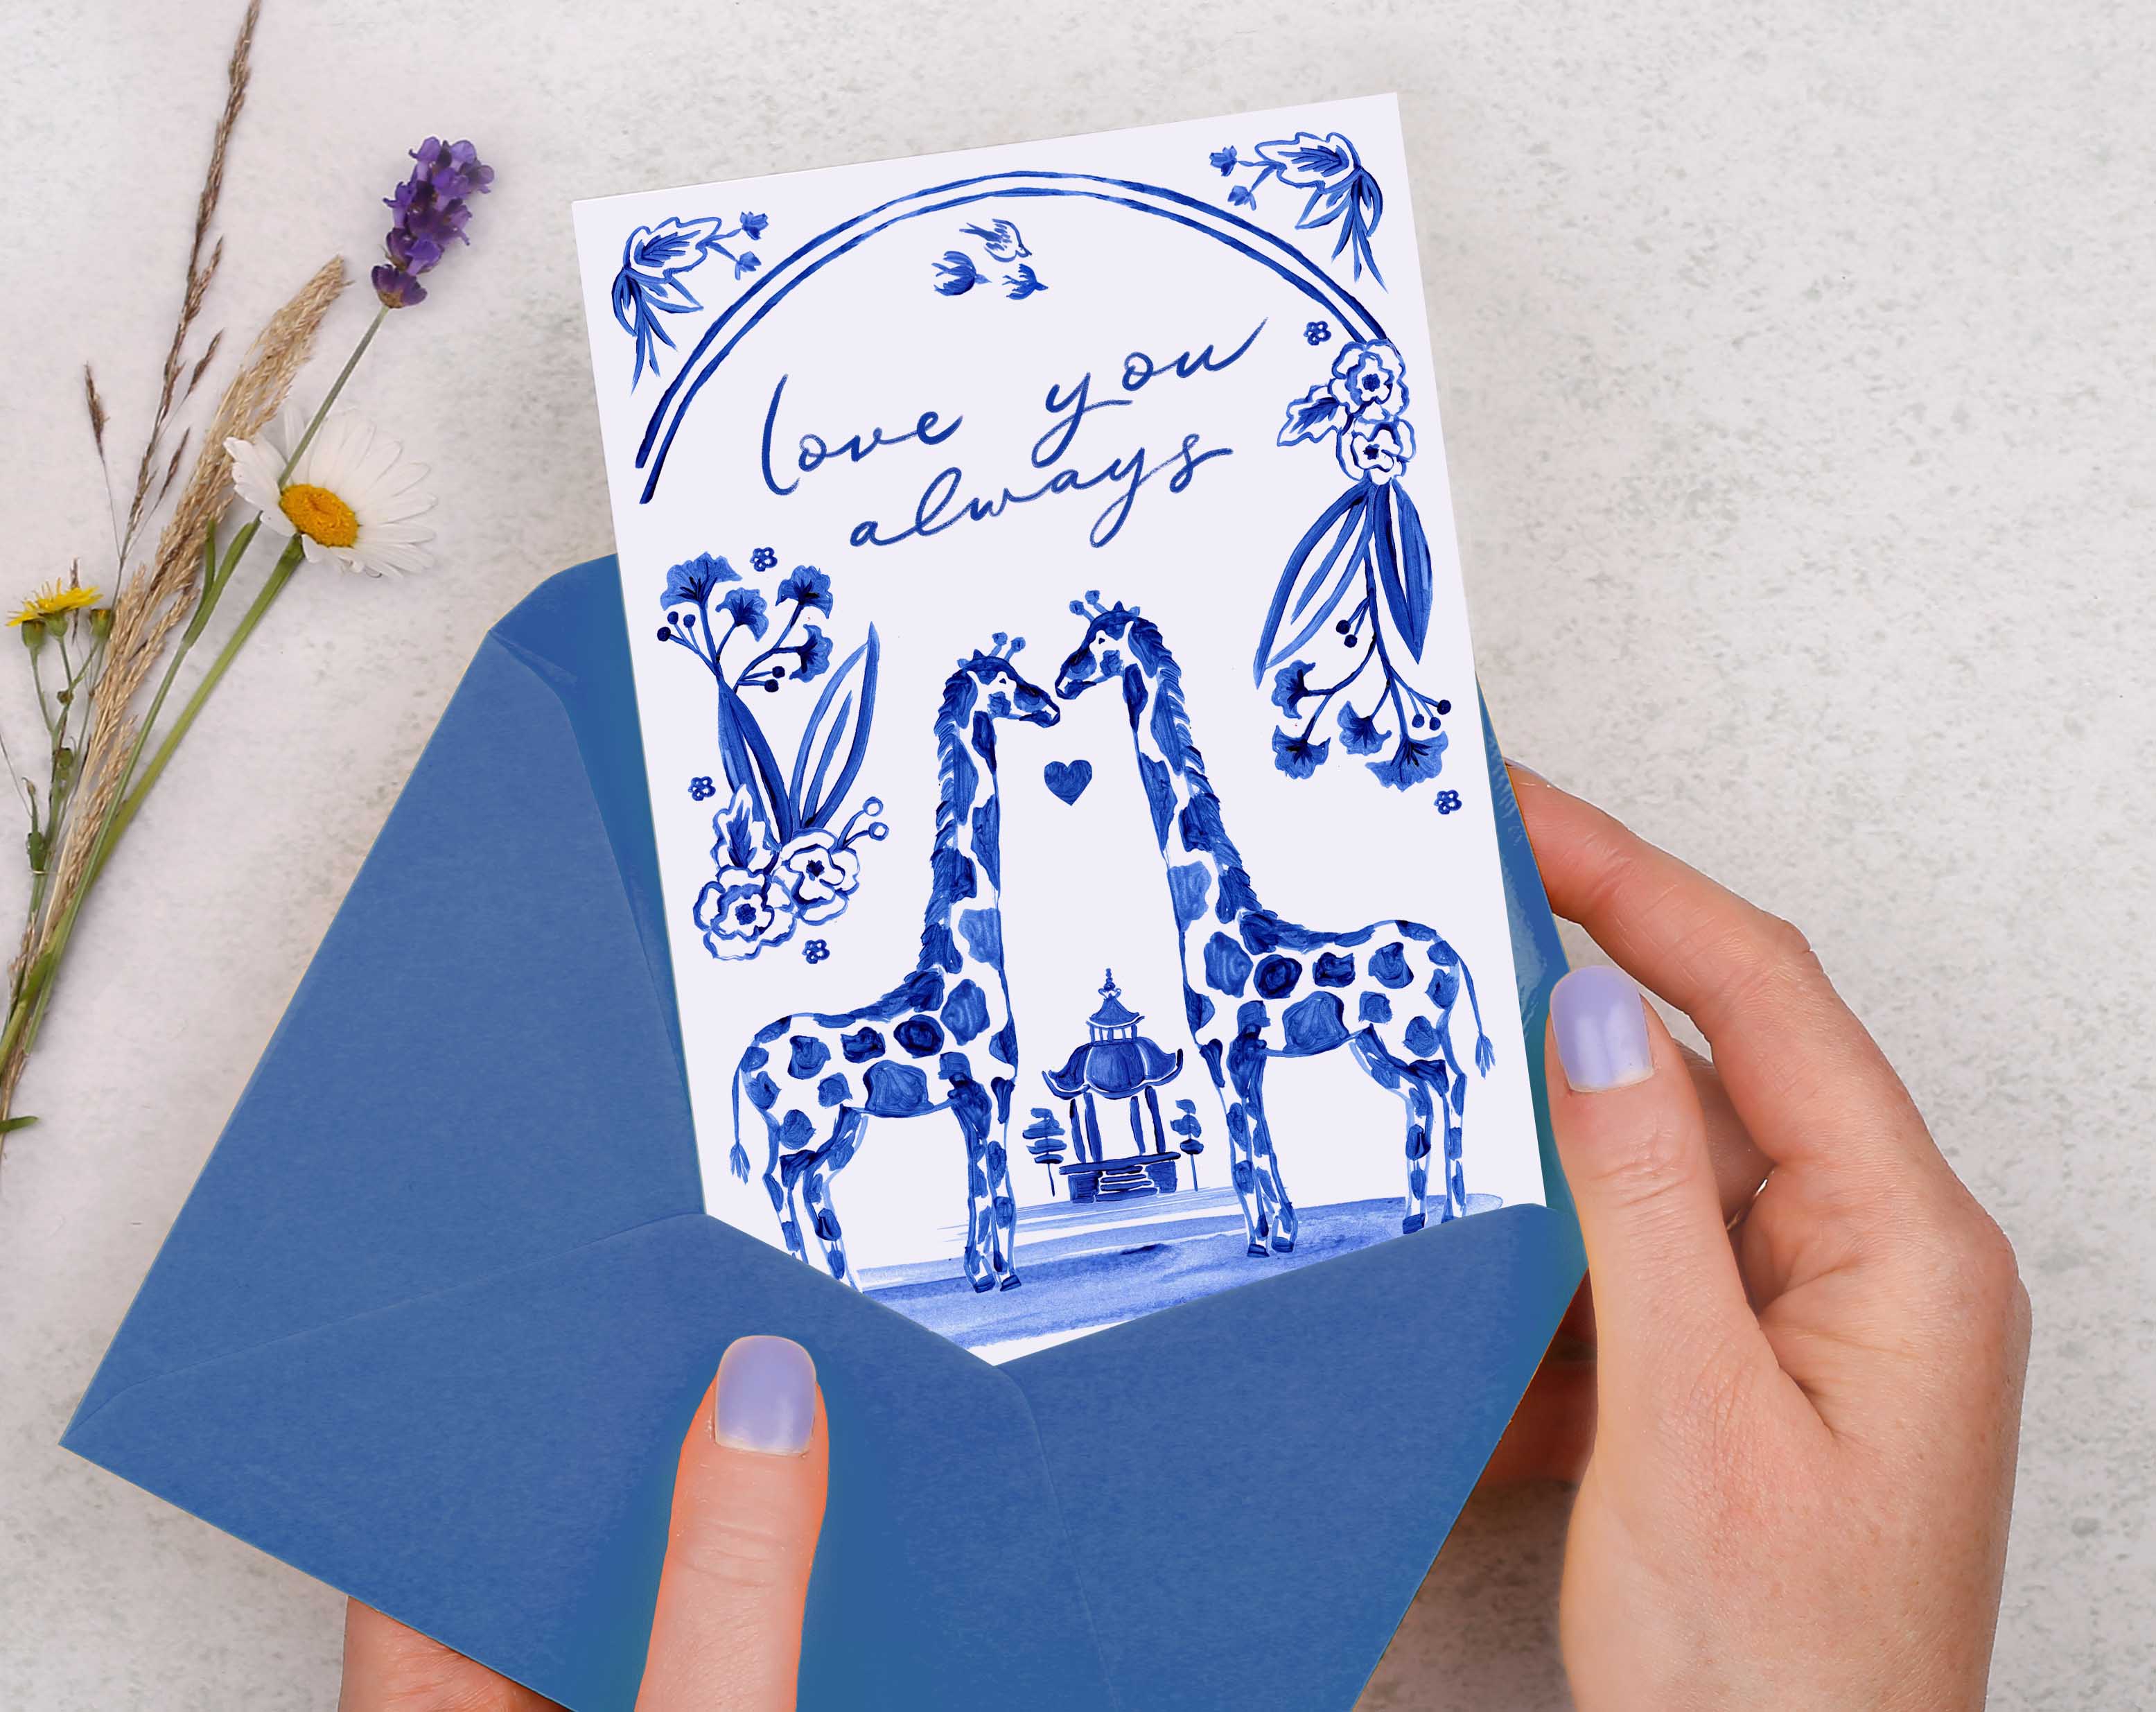 A blue porcelain inspired Anniversary Card with 2 giraffes in love, surrounded by hand painted flowers.